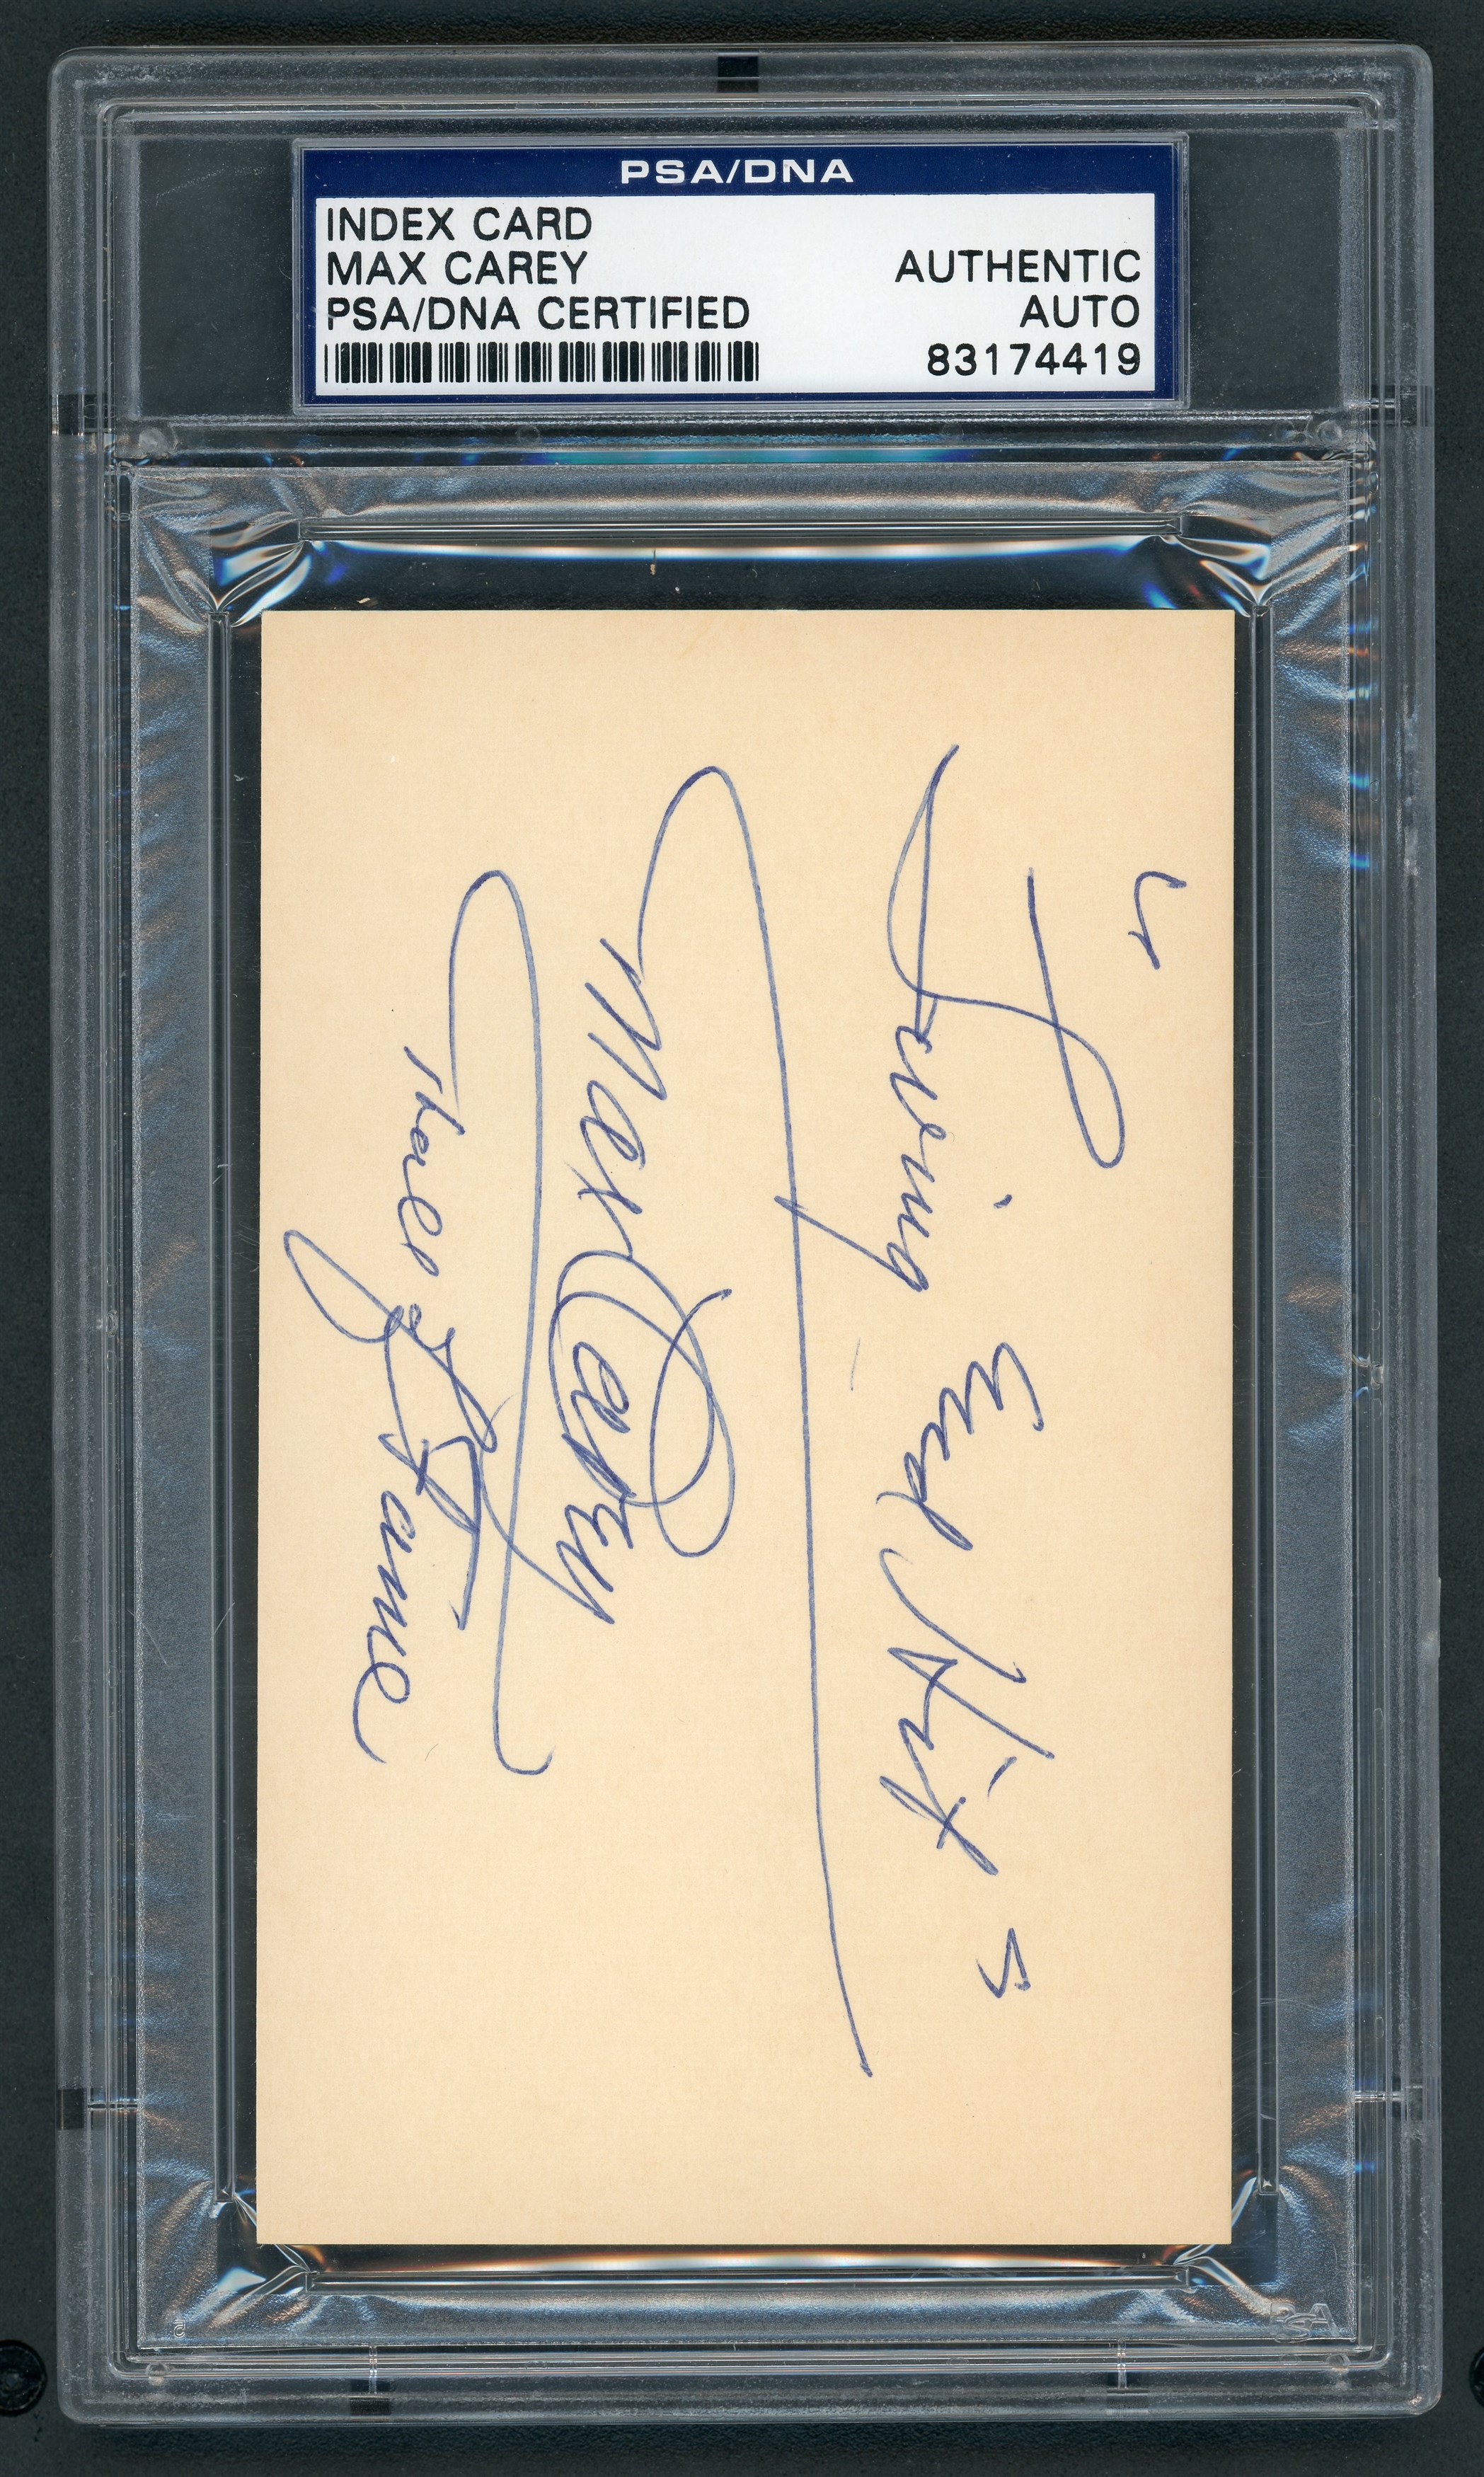 Clemente and Pittsburgh Pirates - Max Carey Signed Inscribed Index Card (PSA)